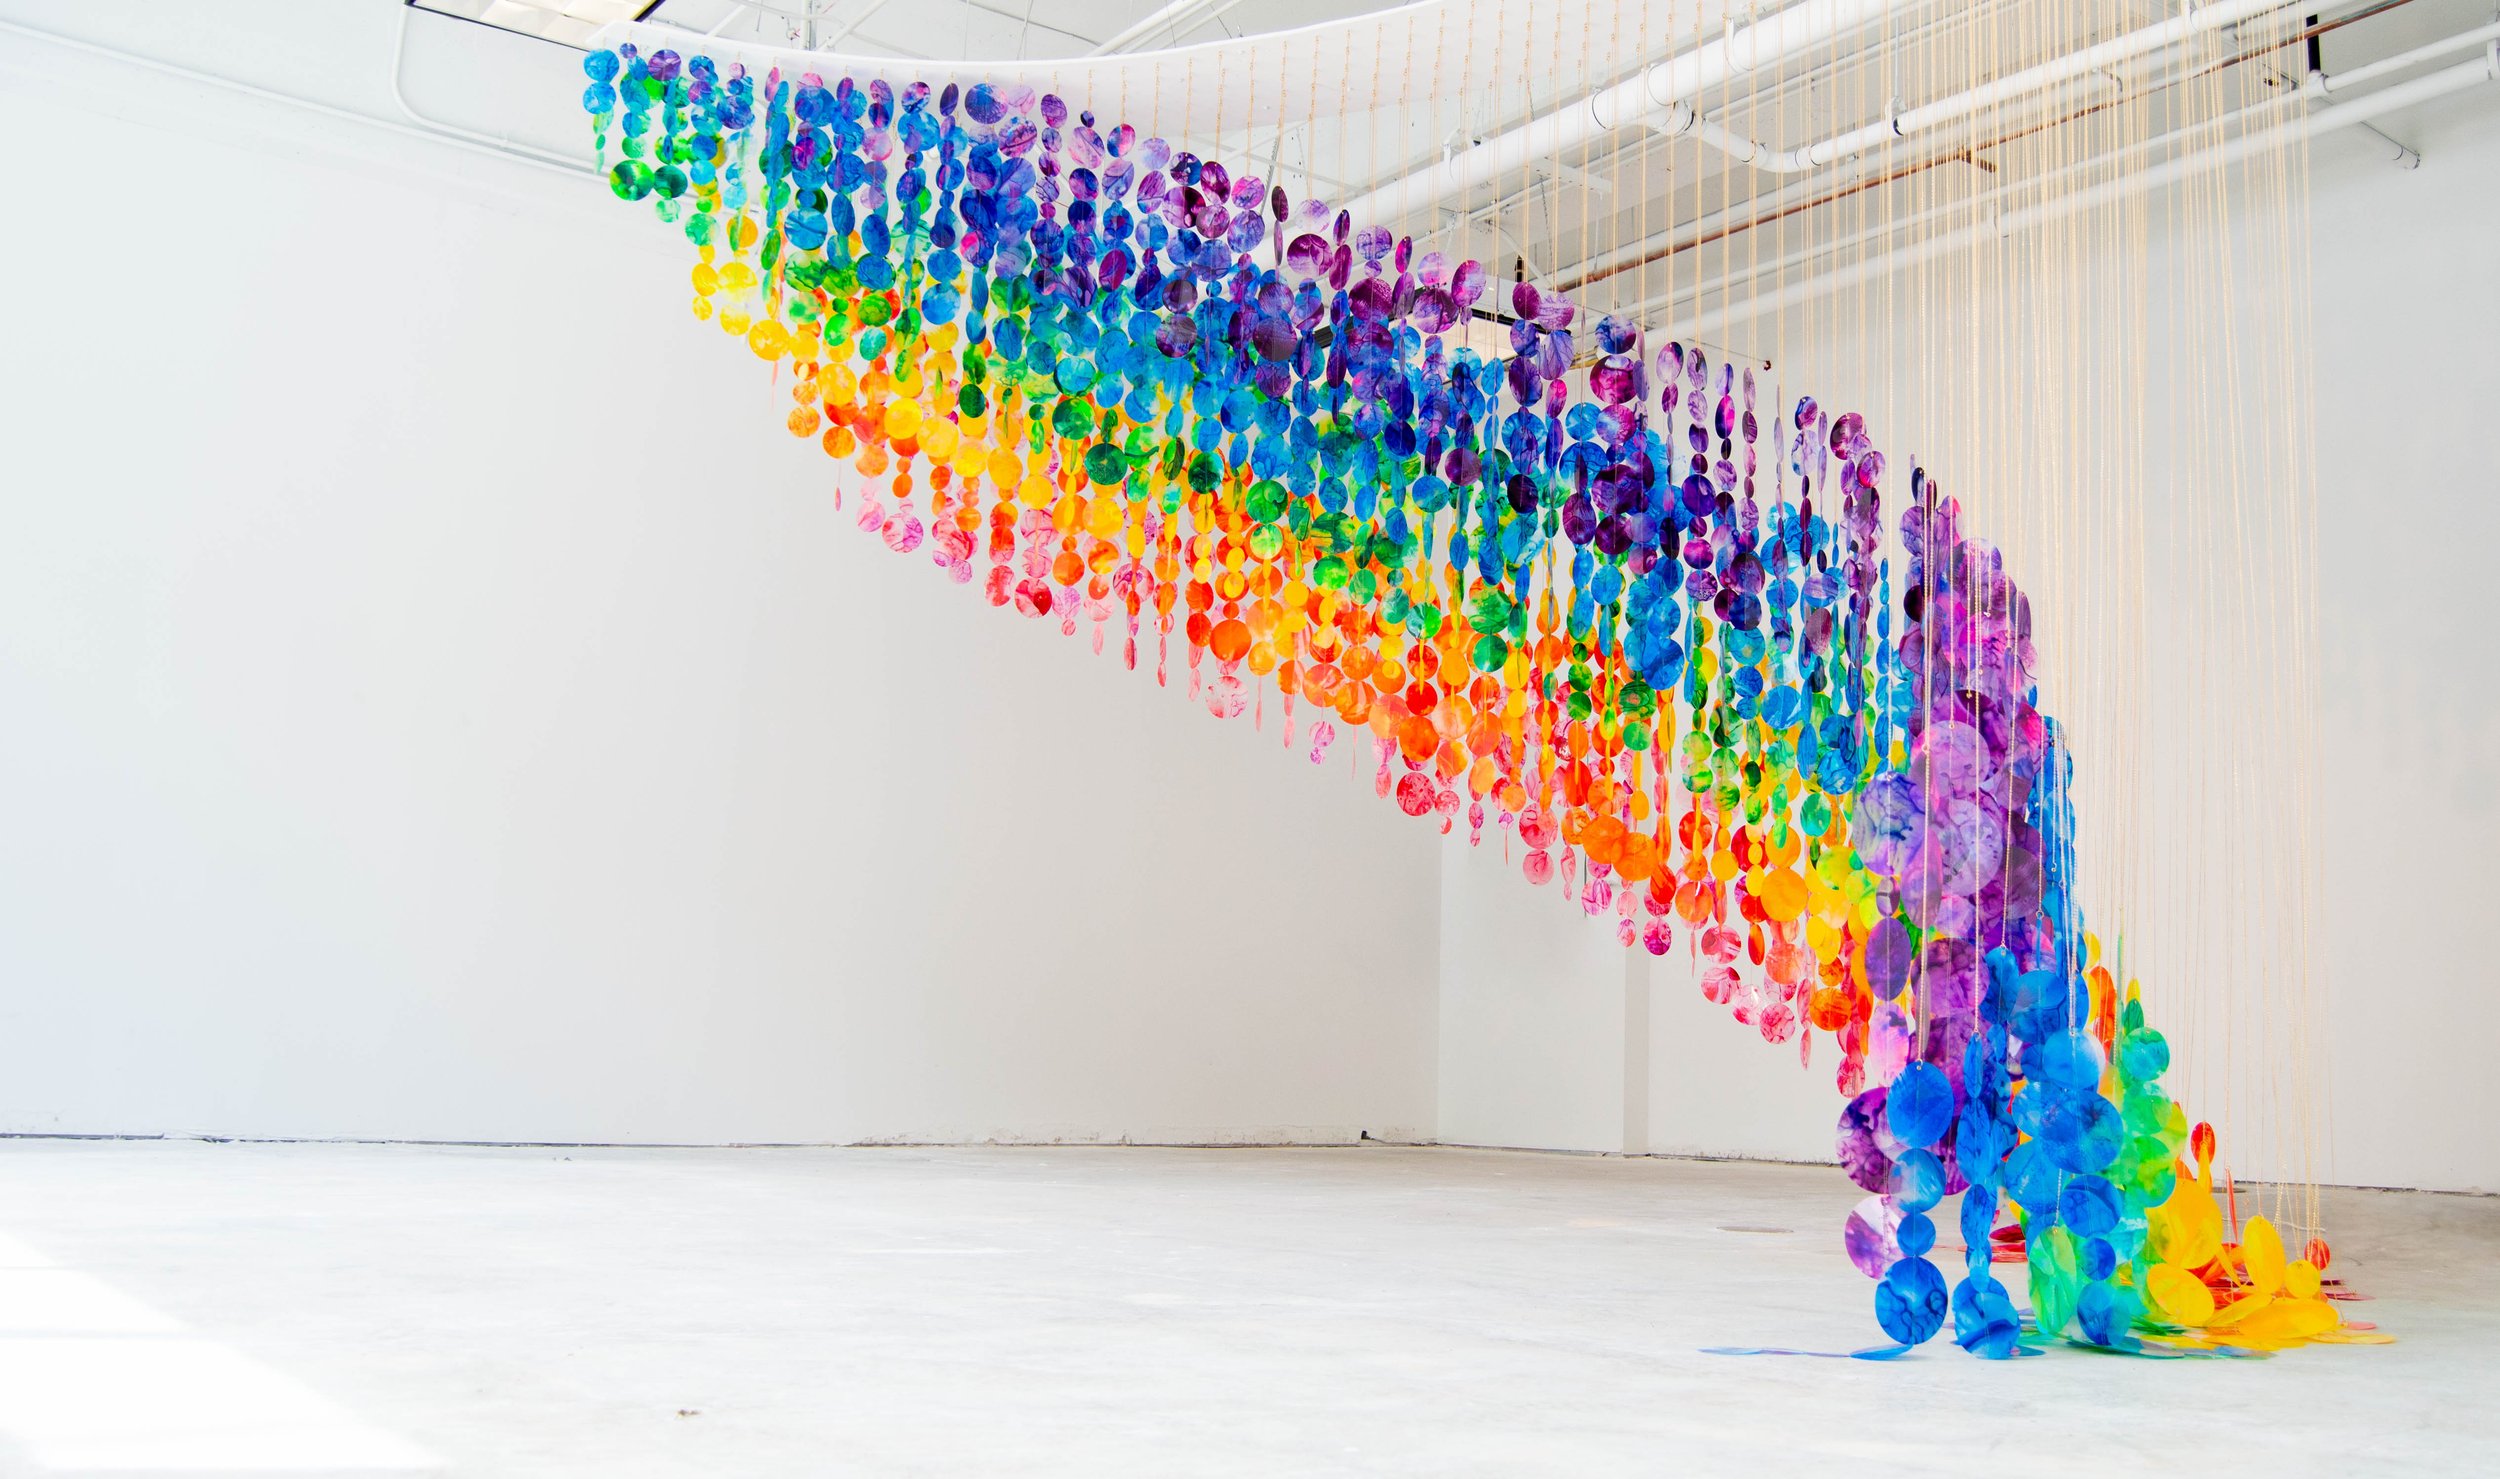   Suspended rainbow installation, giant immersive mobile art, Raleigh North Carolina installation artist, colorful kinetic rainbow sculpture, immersive installation, suspended sculpture, Raleigh North Carolina sculptor We Wondered If We Could Reach I